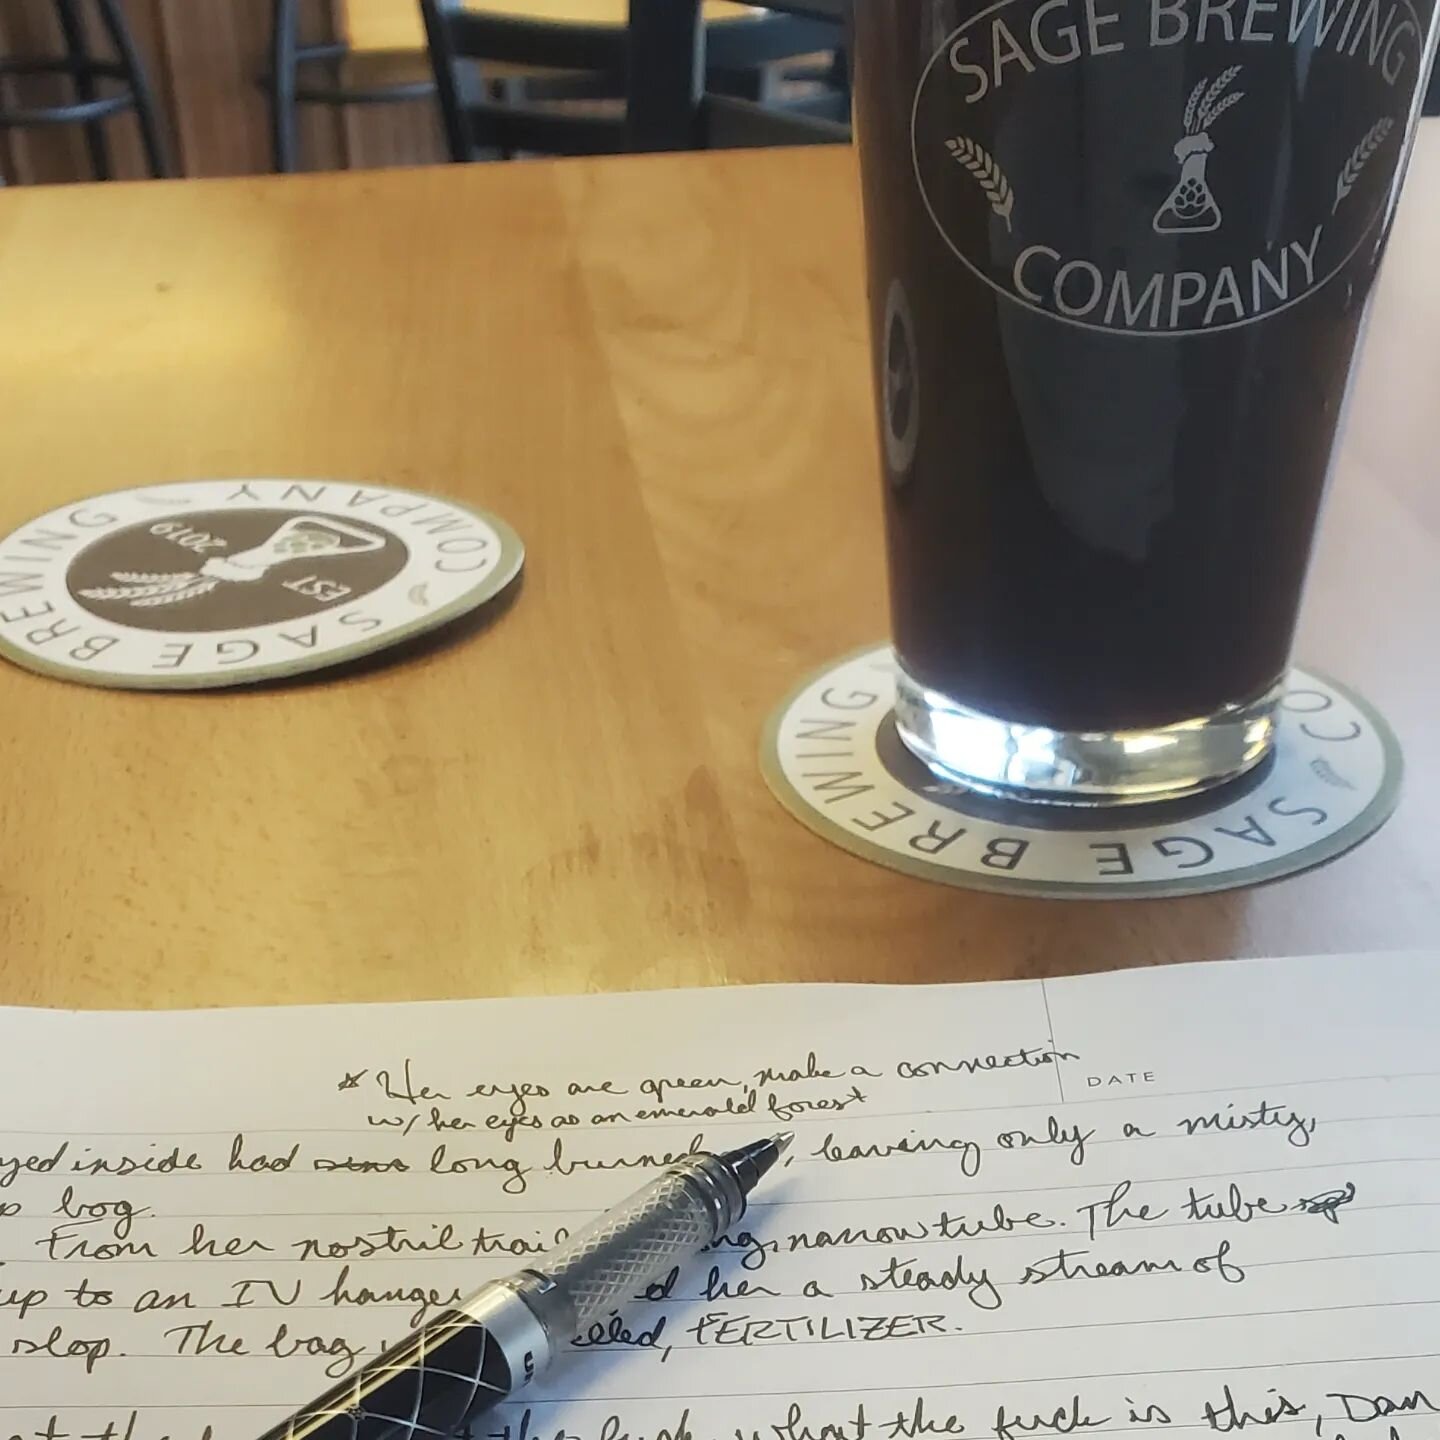 I write best where the beer is good. 

#sagebrewingcompany #podcastersofinstagram #writersofinstagram #amwriting